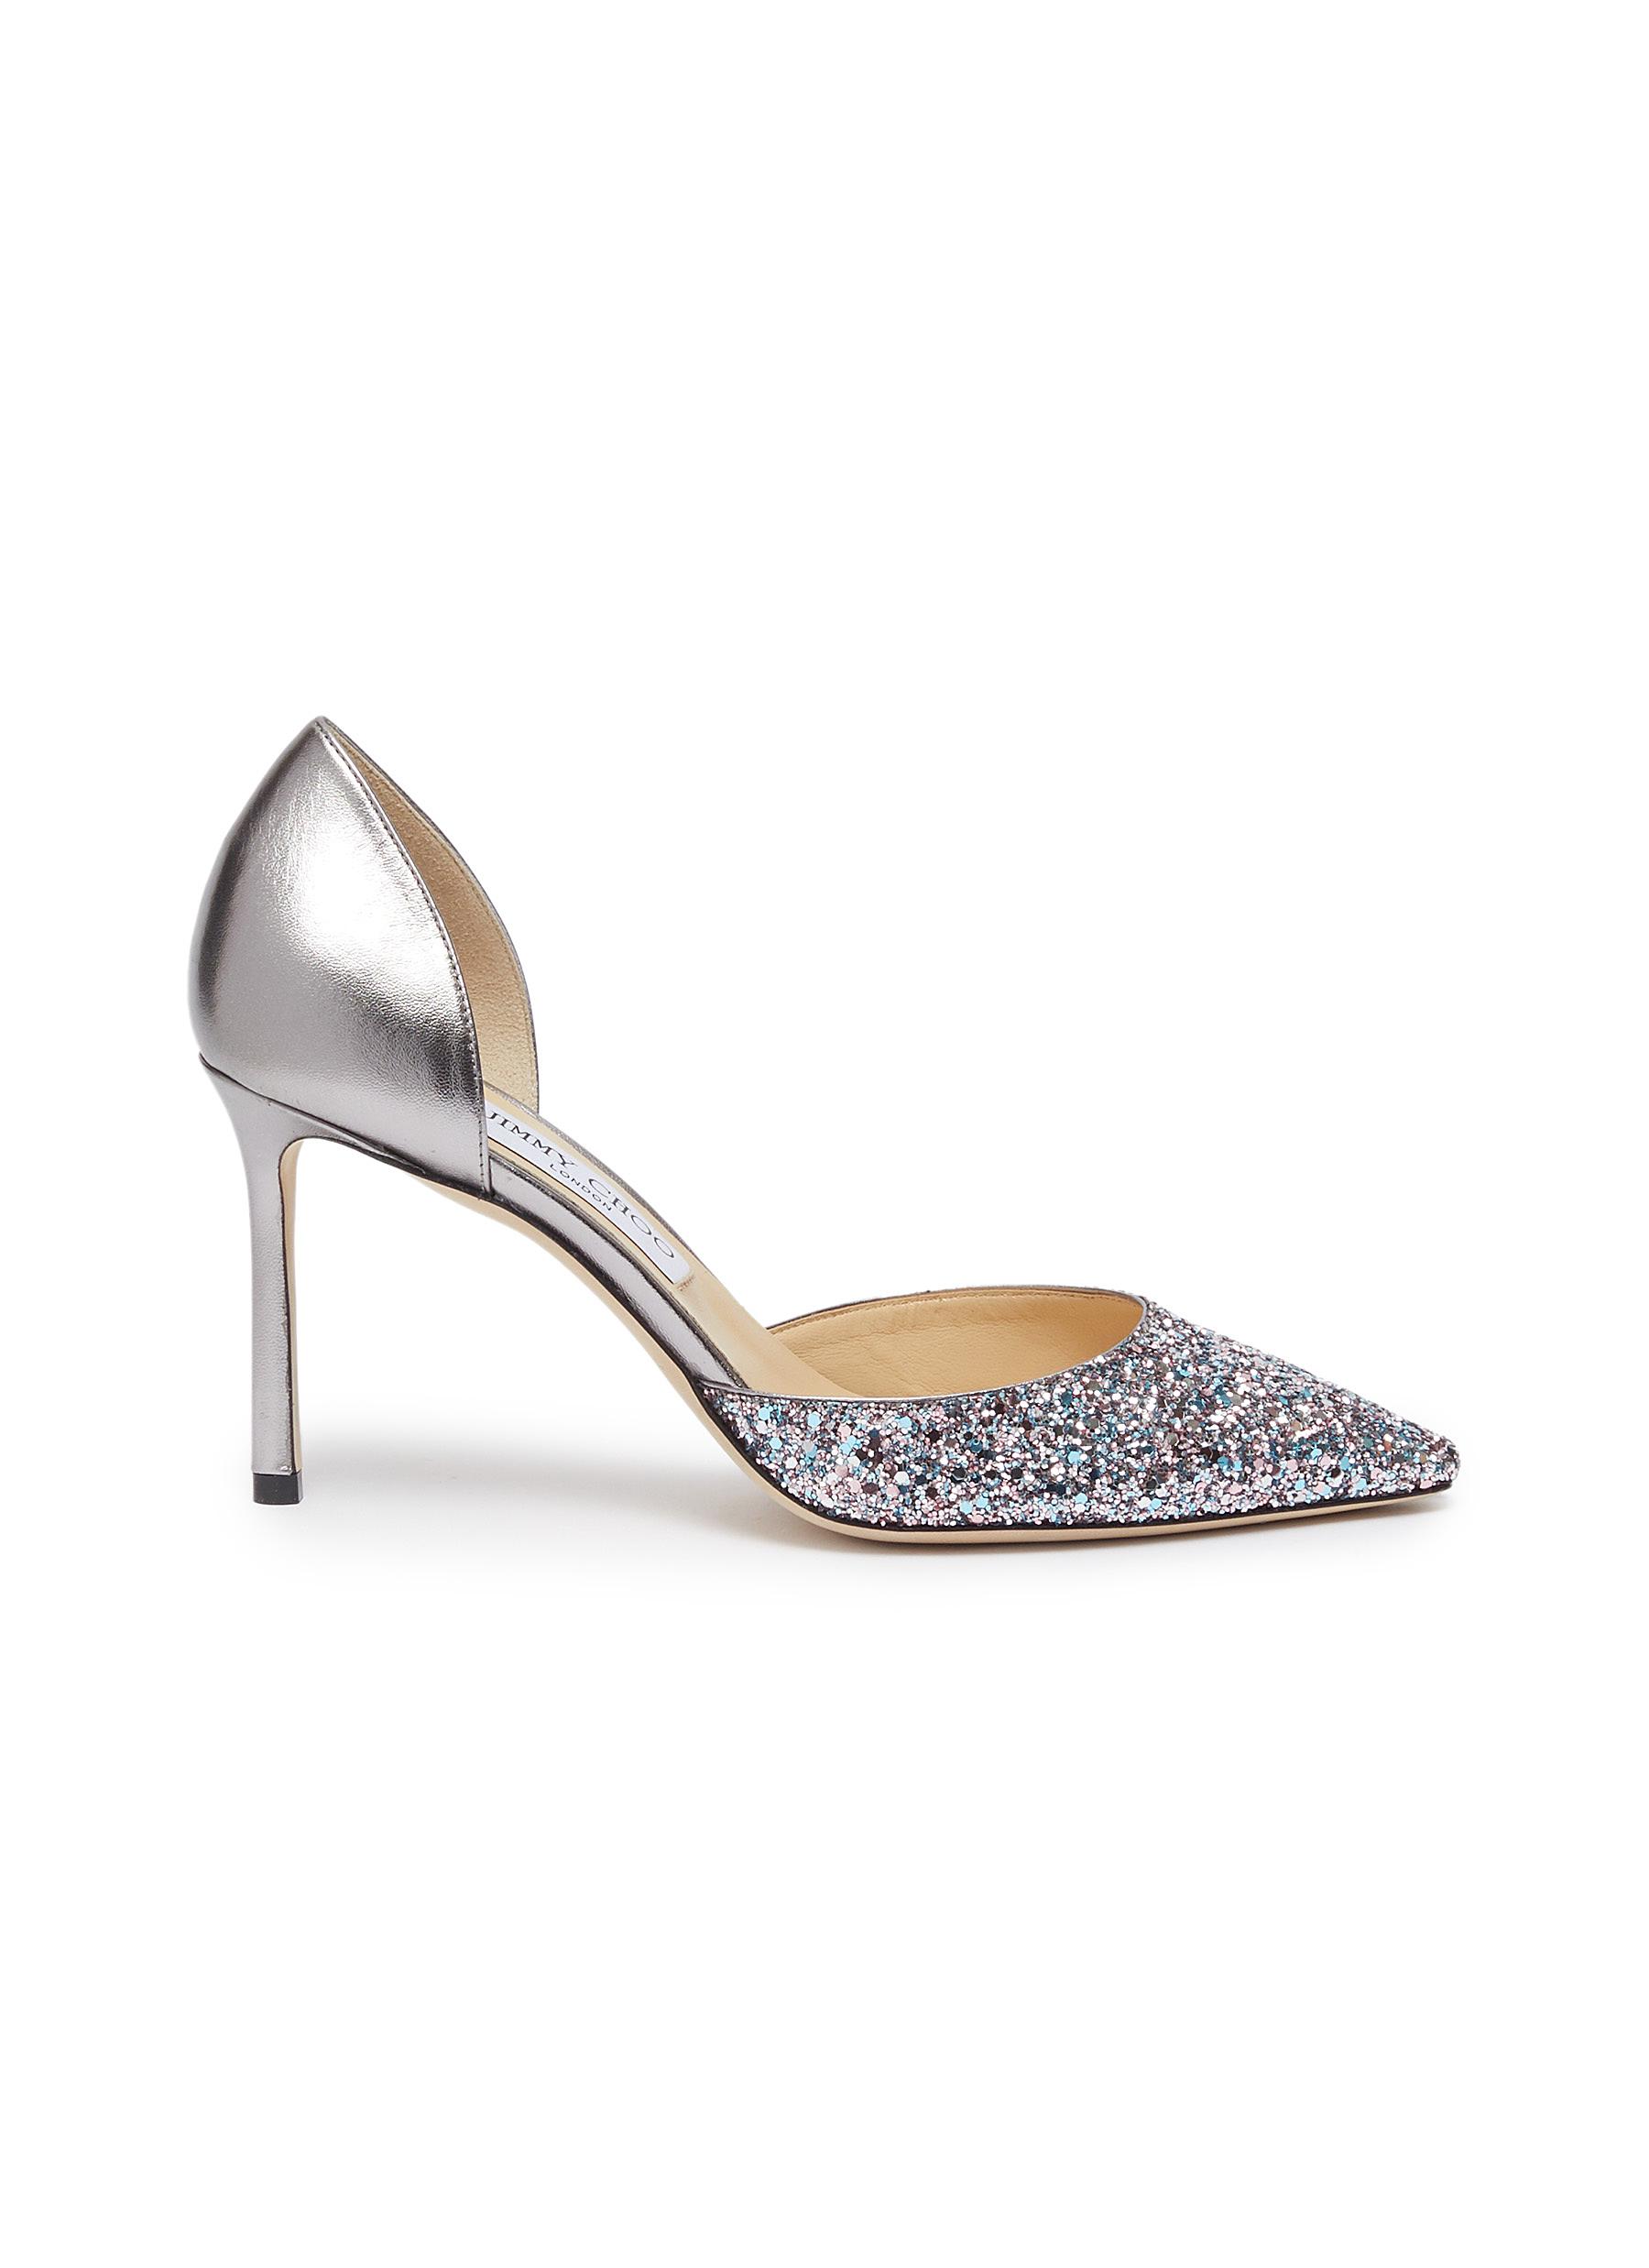 Esther 85 coarse glitter metallic leather dOrsay pumps by Jimmy Choo